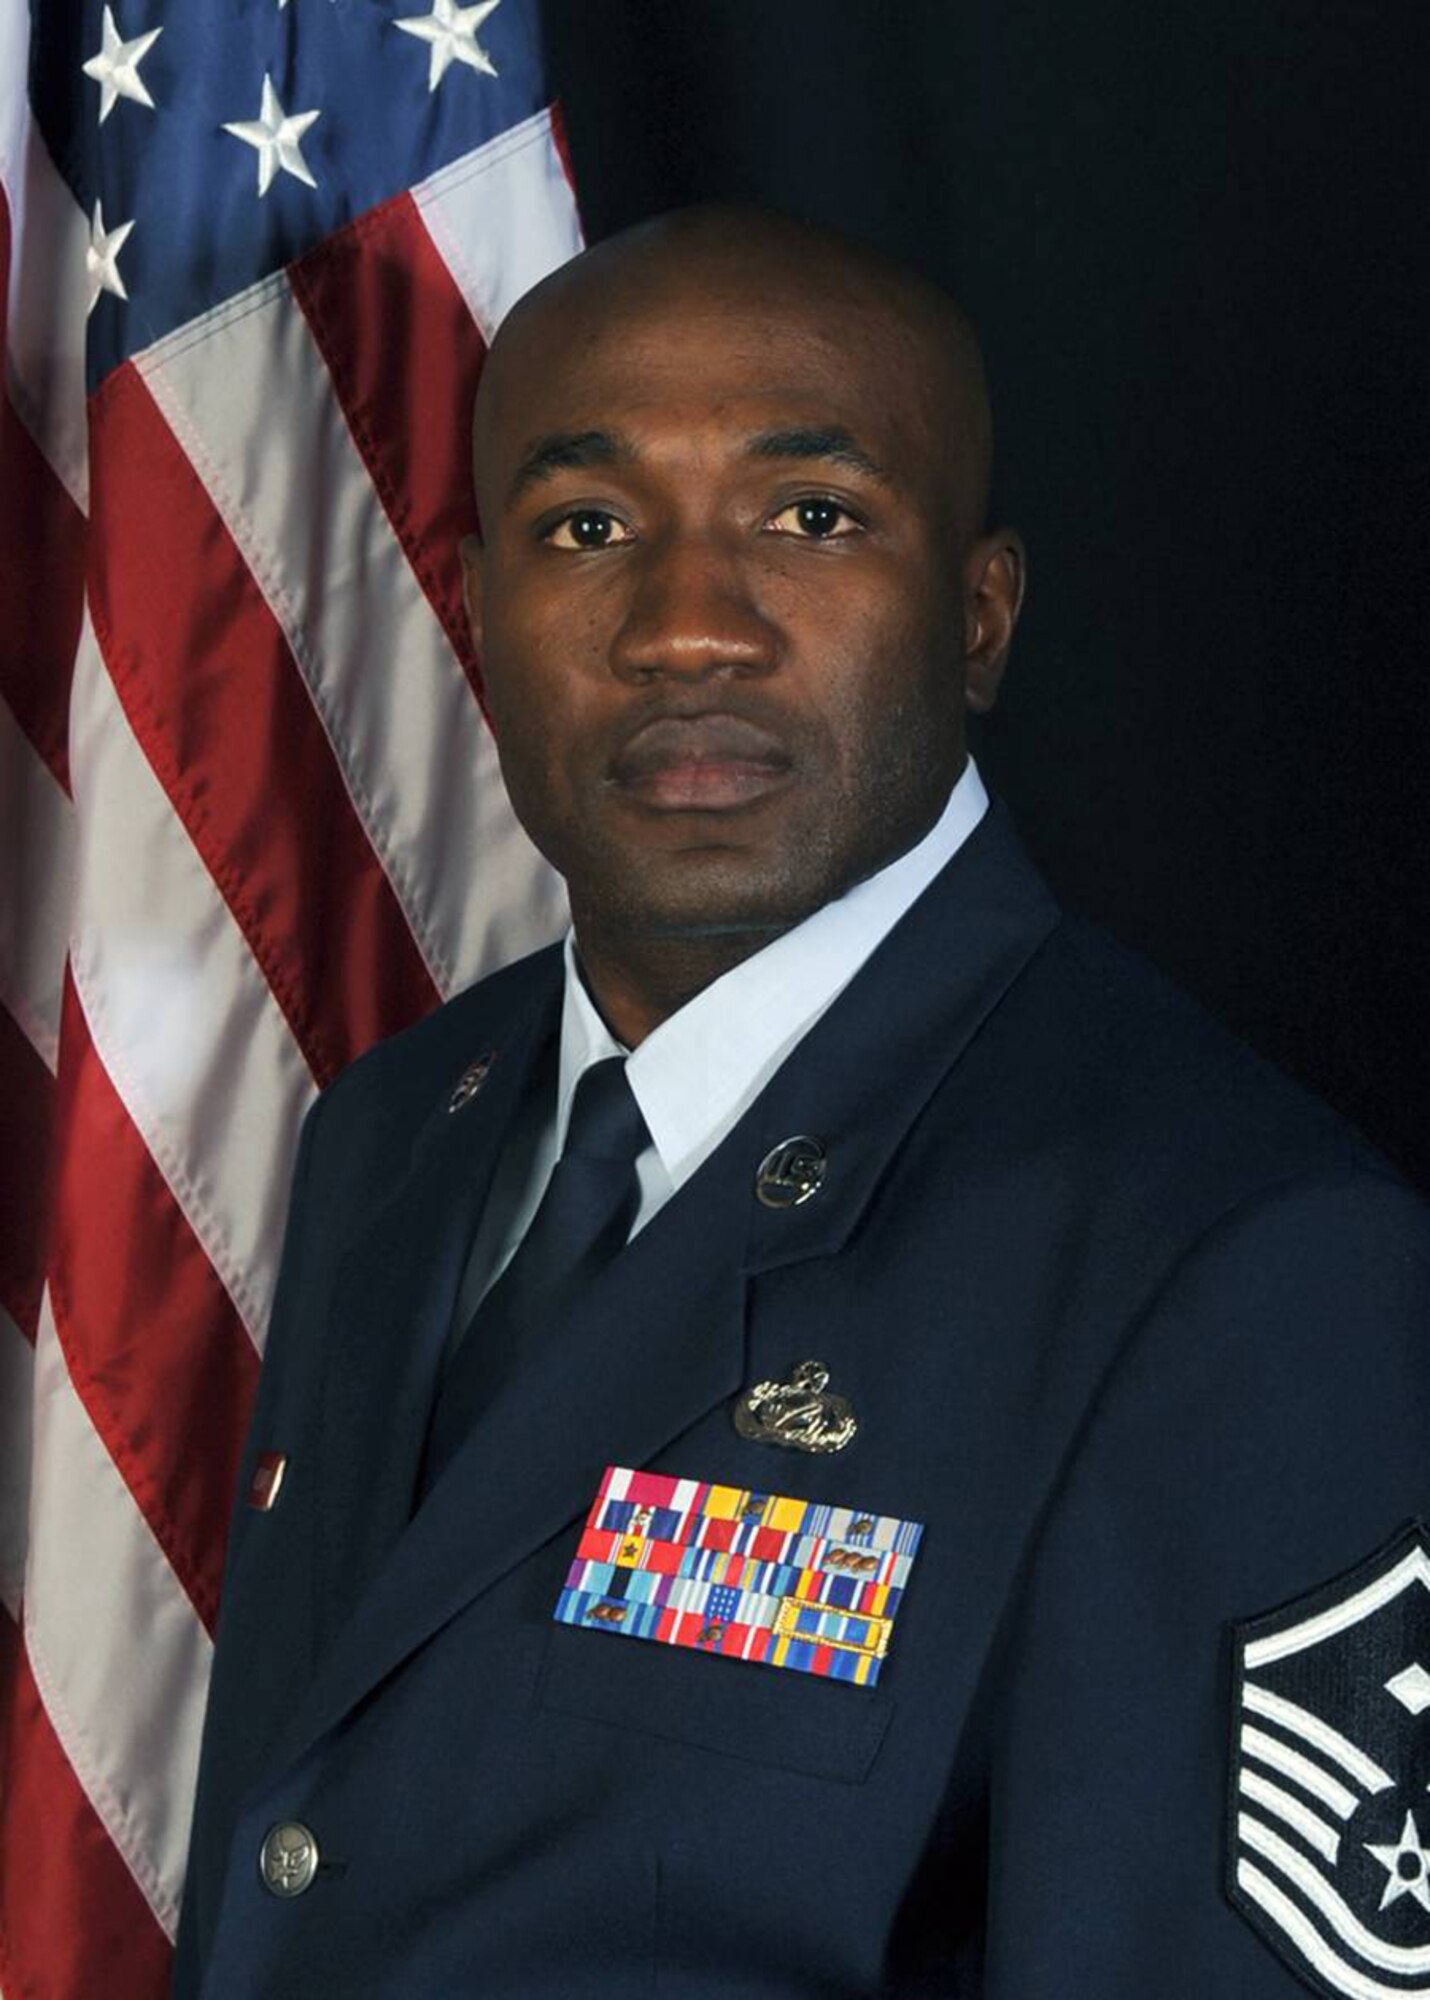 OFFUTT AIR FORCE BASE, Neb. -- Master Sgt. Boston A. Alexander, from Nellis AFB, Nev., is one of 29 Airmen nominated for awards who will attend the 2010 Air Combat Command Outstanding Airmen of the Year Awards Banquet in Omaha, Neb., April 21. Sergeant Alexander is nominated for the First Sergeant of the Year Award. U.S. Air Force courtesy photo.